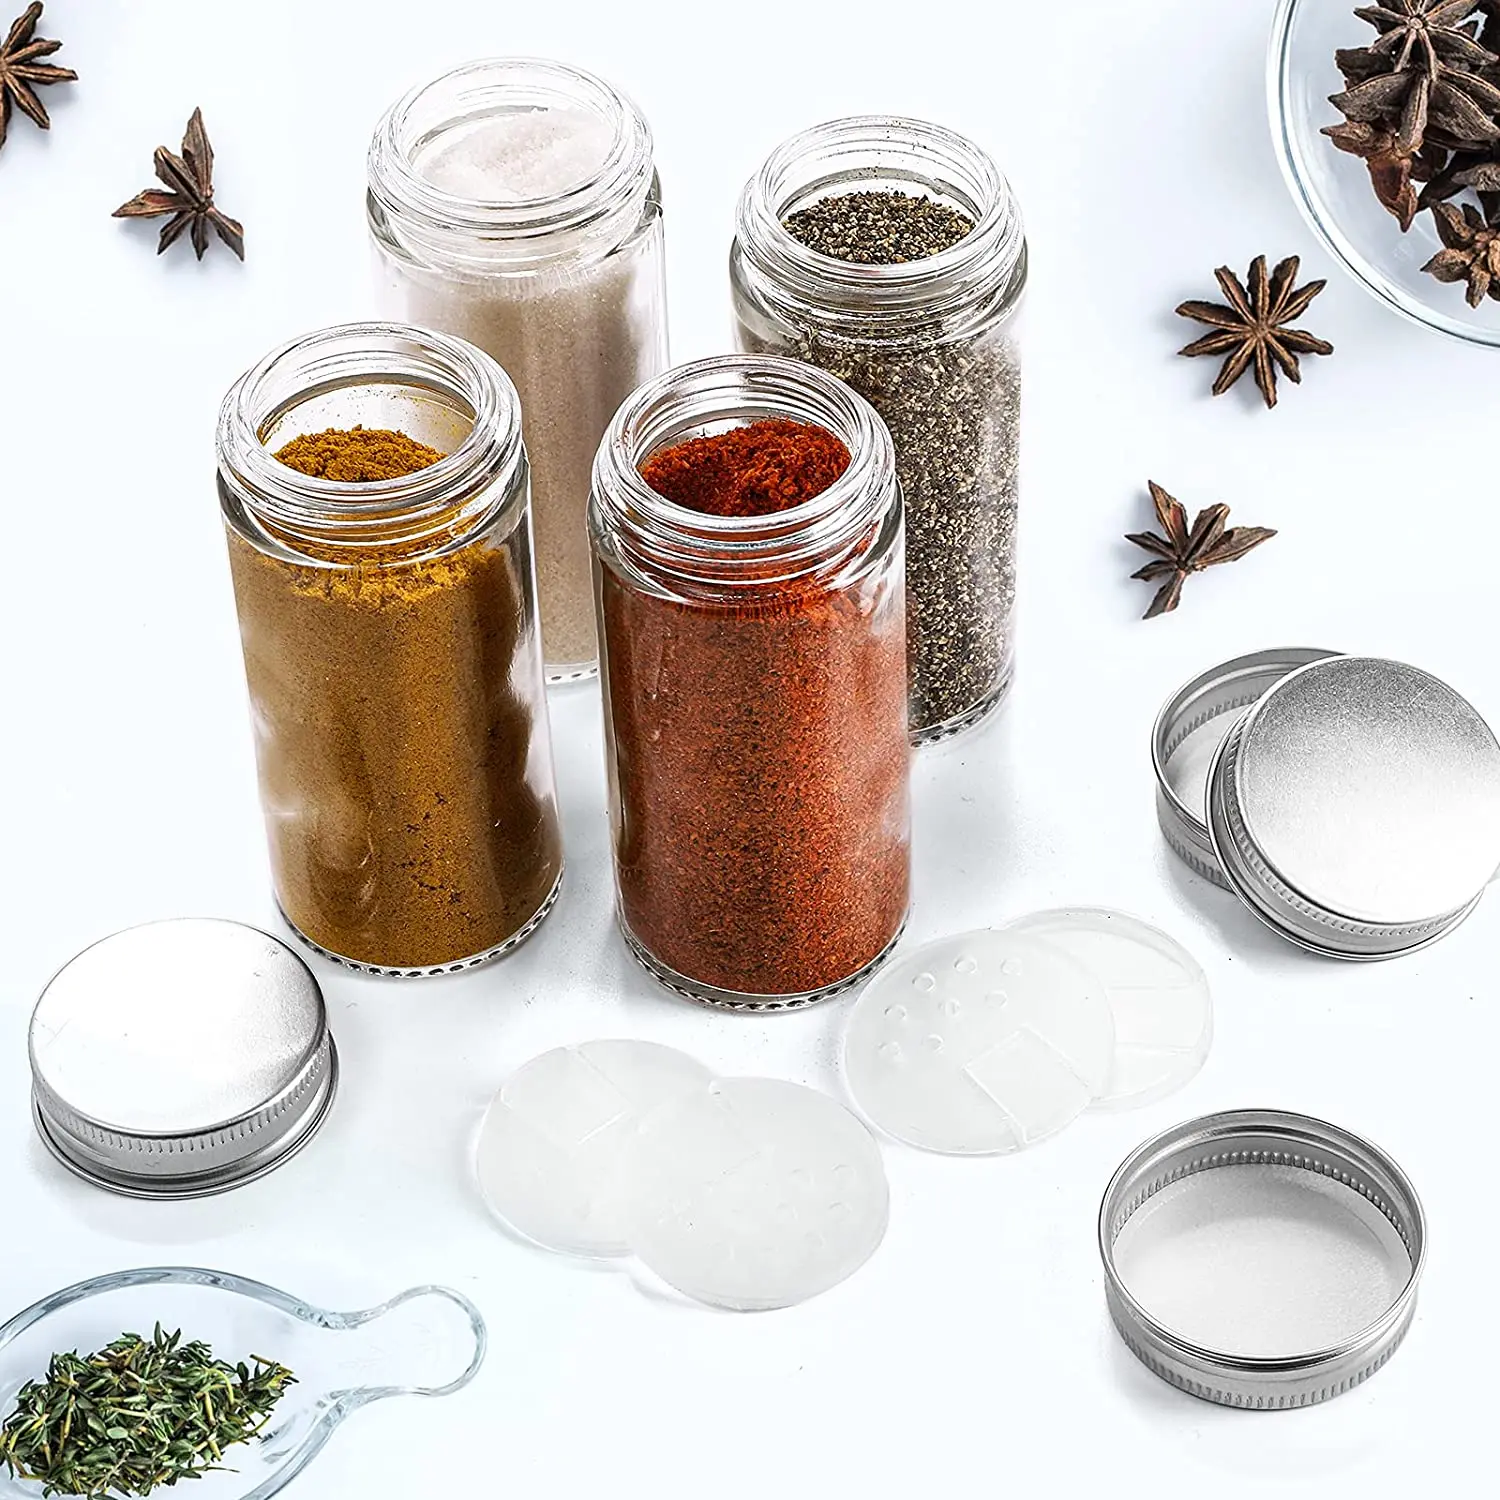 12 Pack Round Spice Bottles 3oz Glass Spice Jars With Silver Metal